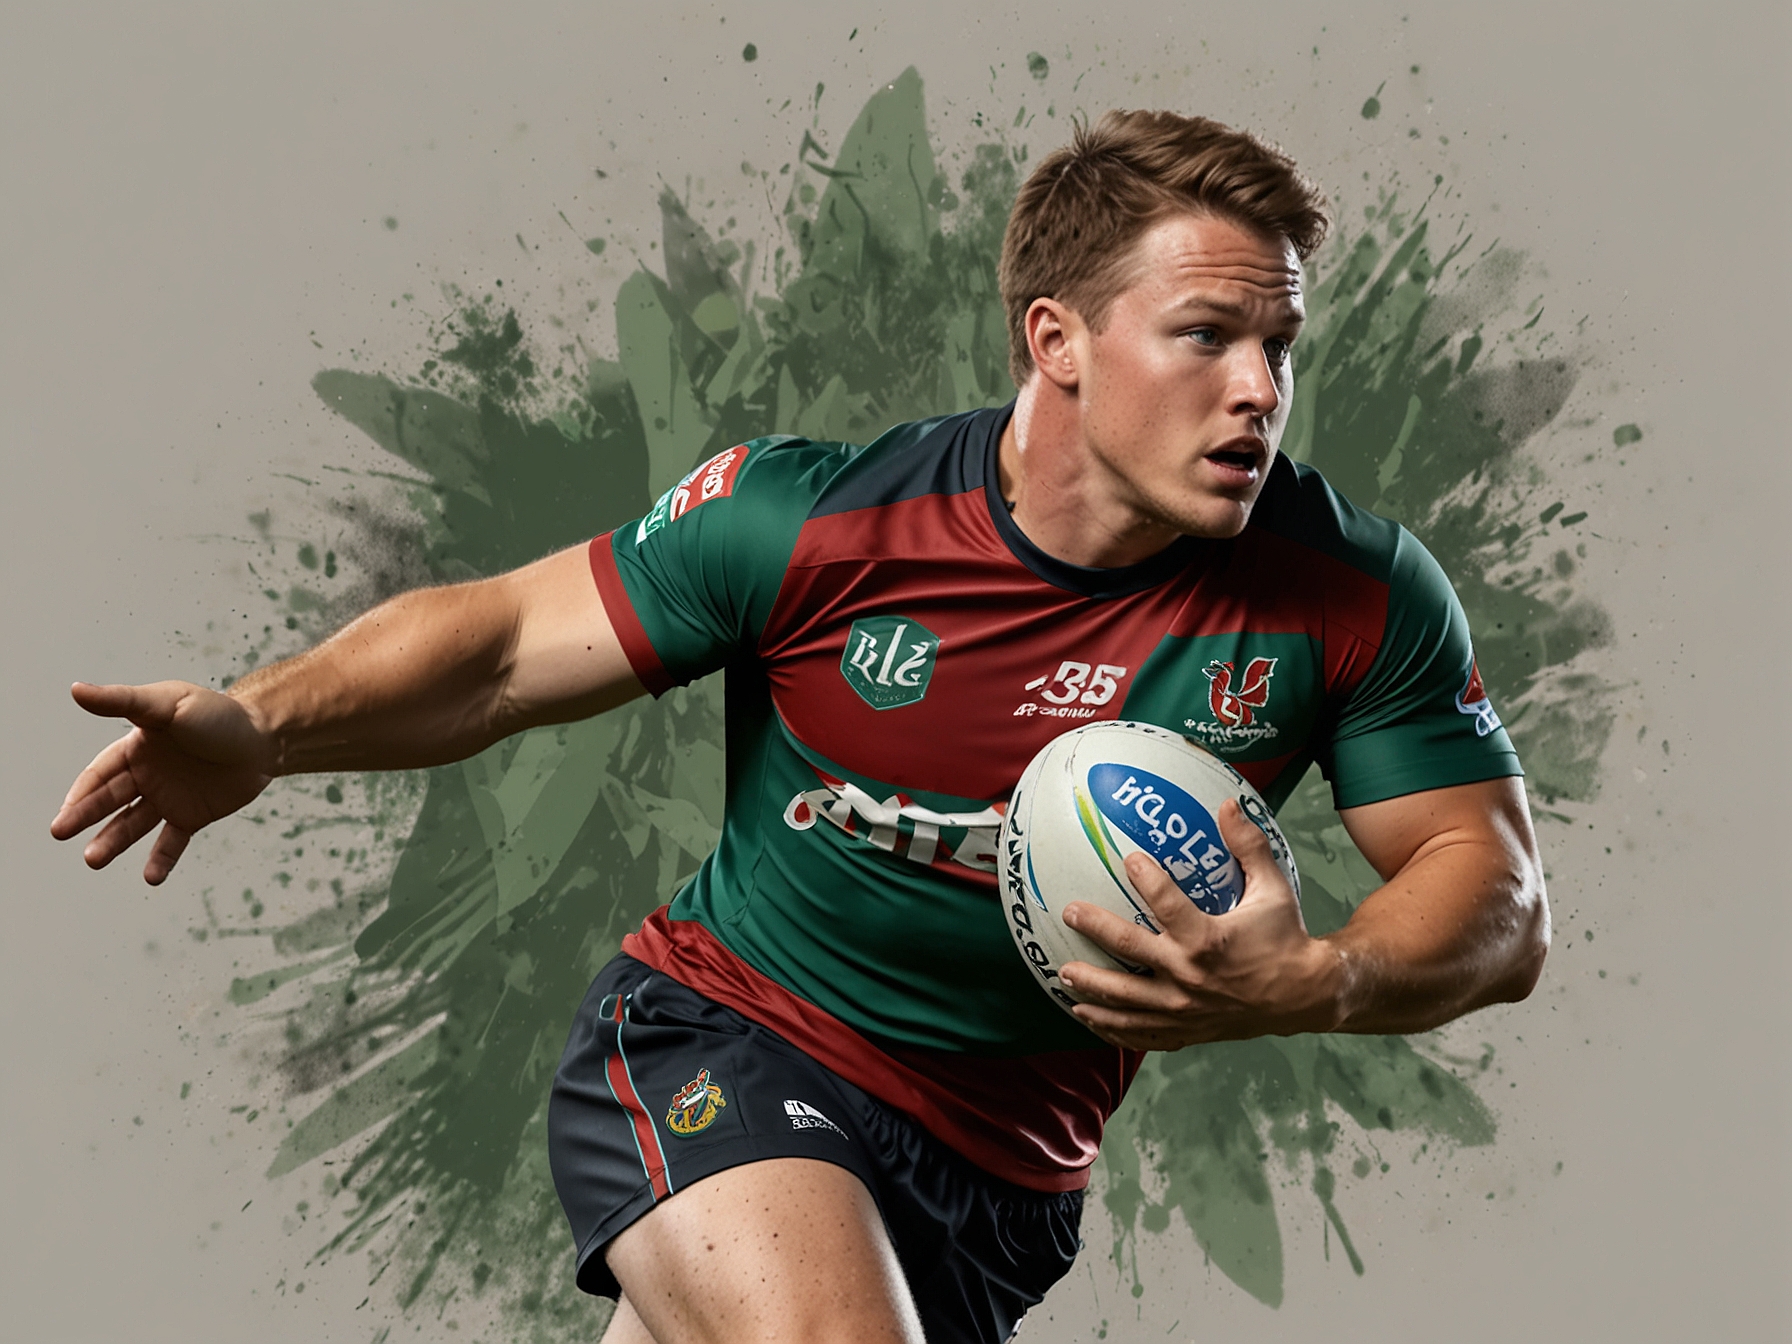 Cameron Murray, in his Rabbitohs jersey, showcasing his fitness and agility on the field, demonstrating the skills and commitment that led to his selection for Origin II.